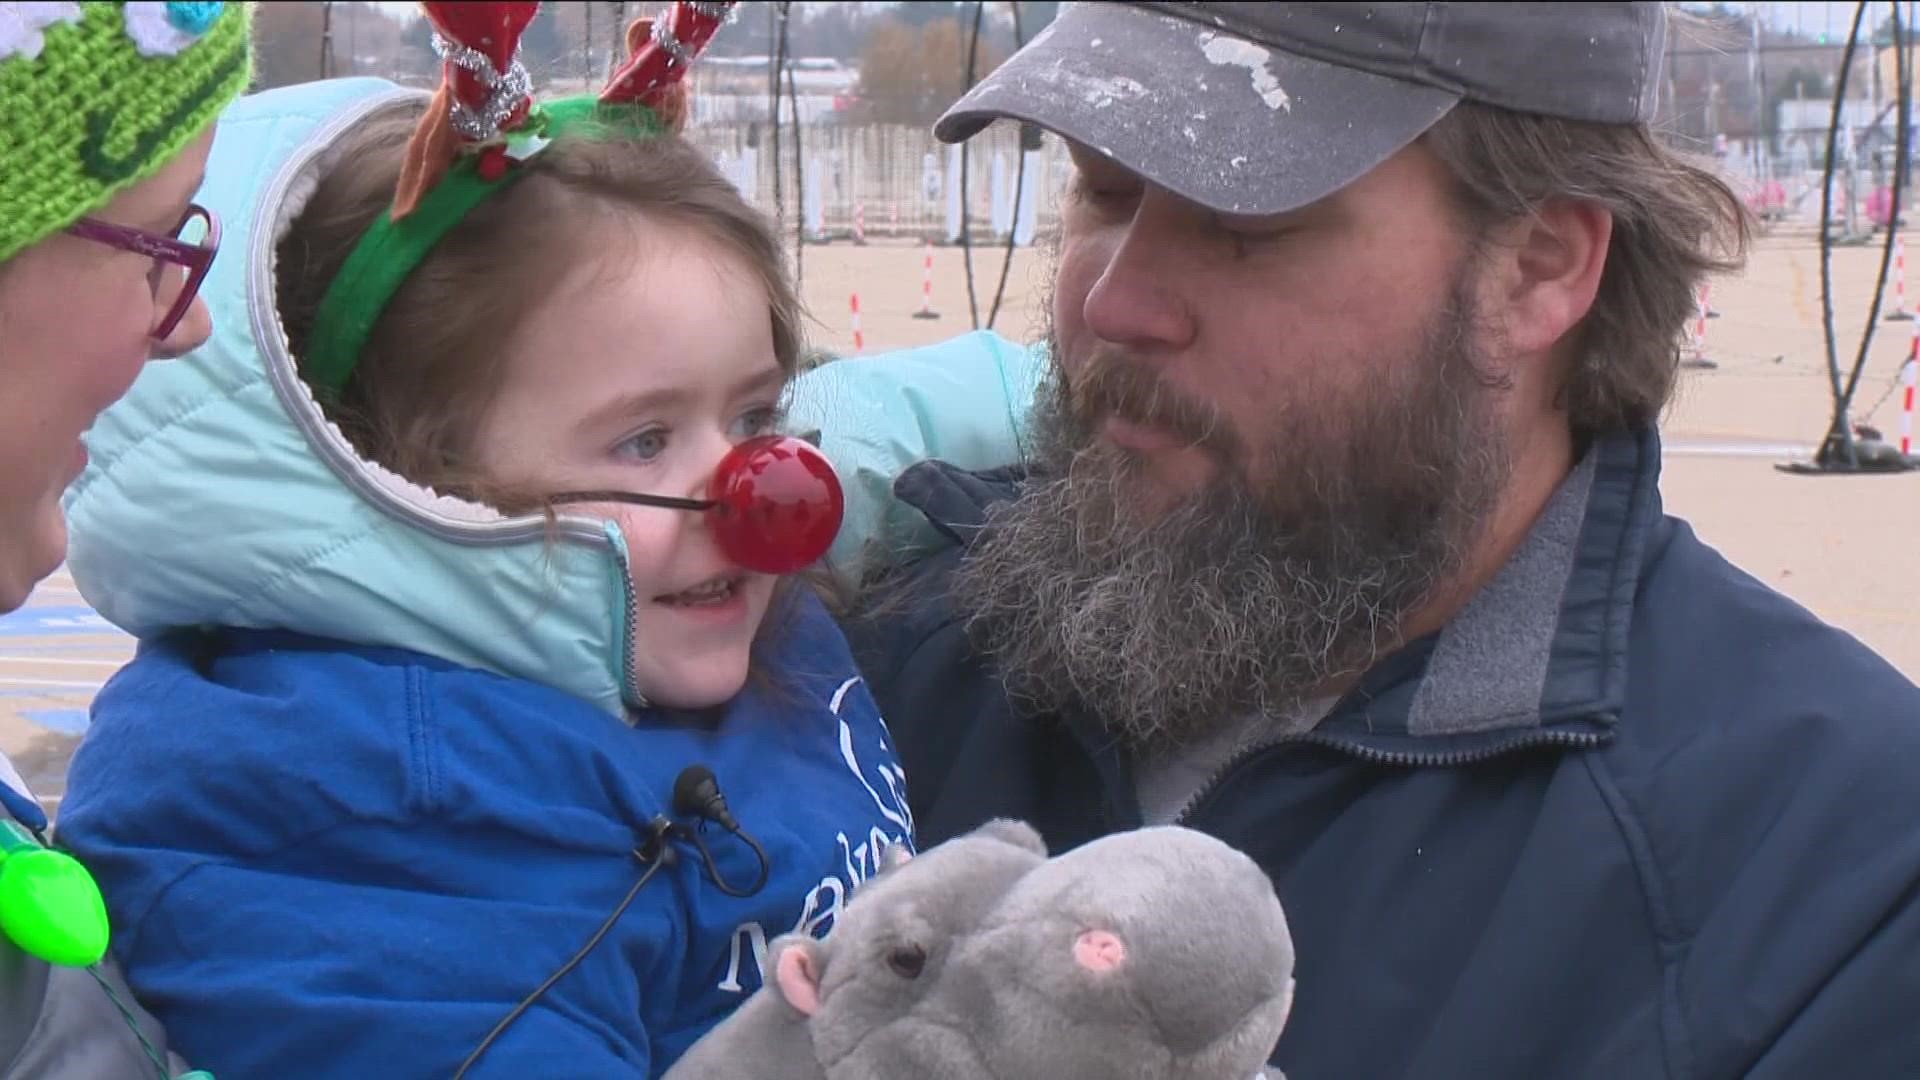 Her family teamed up with Make-a-Wish to kick off the annual light show at the Western Idaho Fairgrounds.